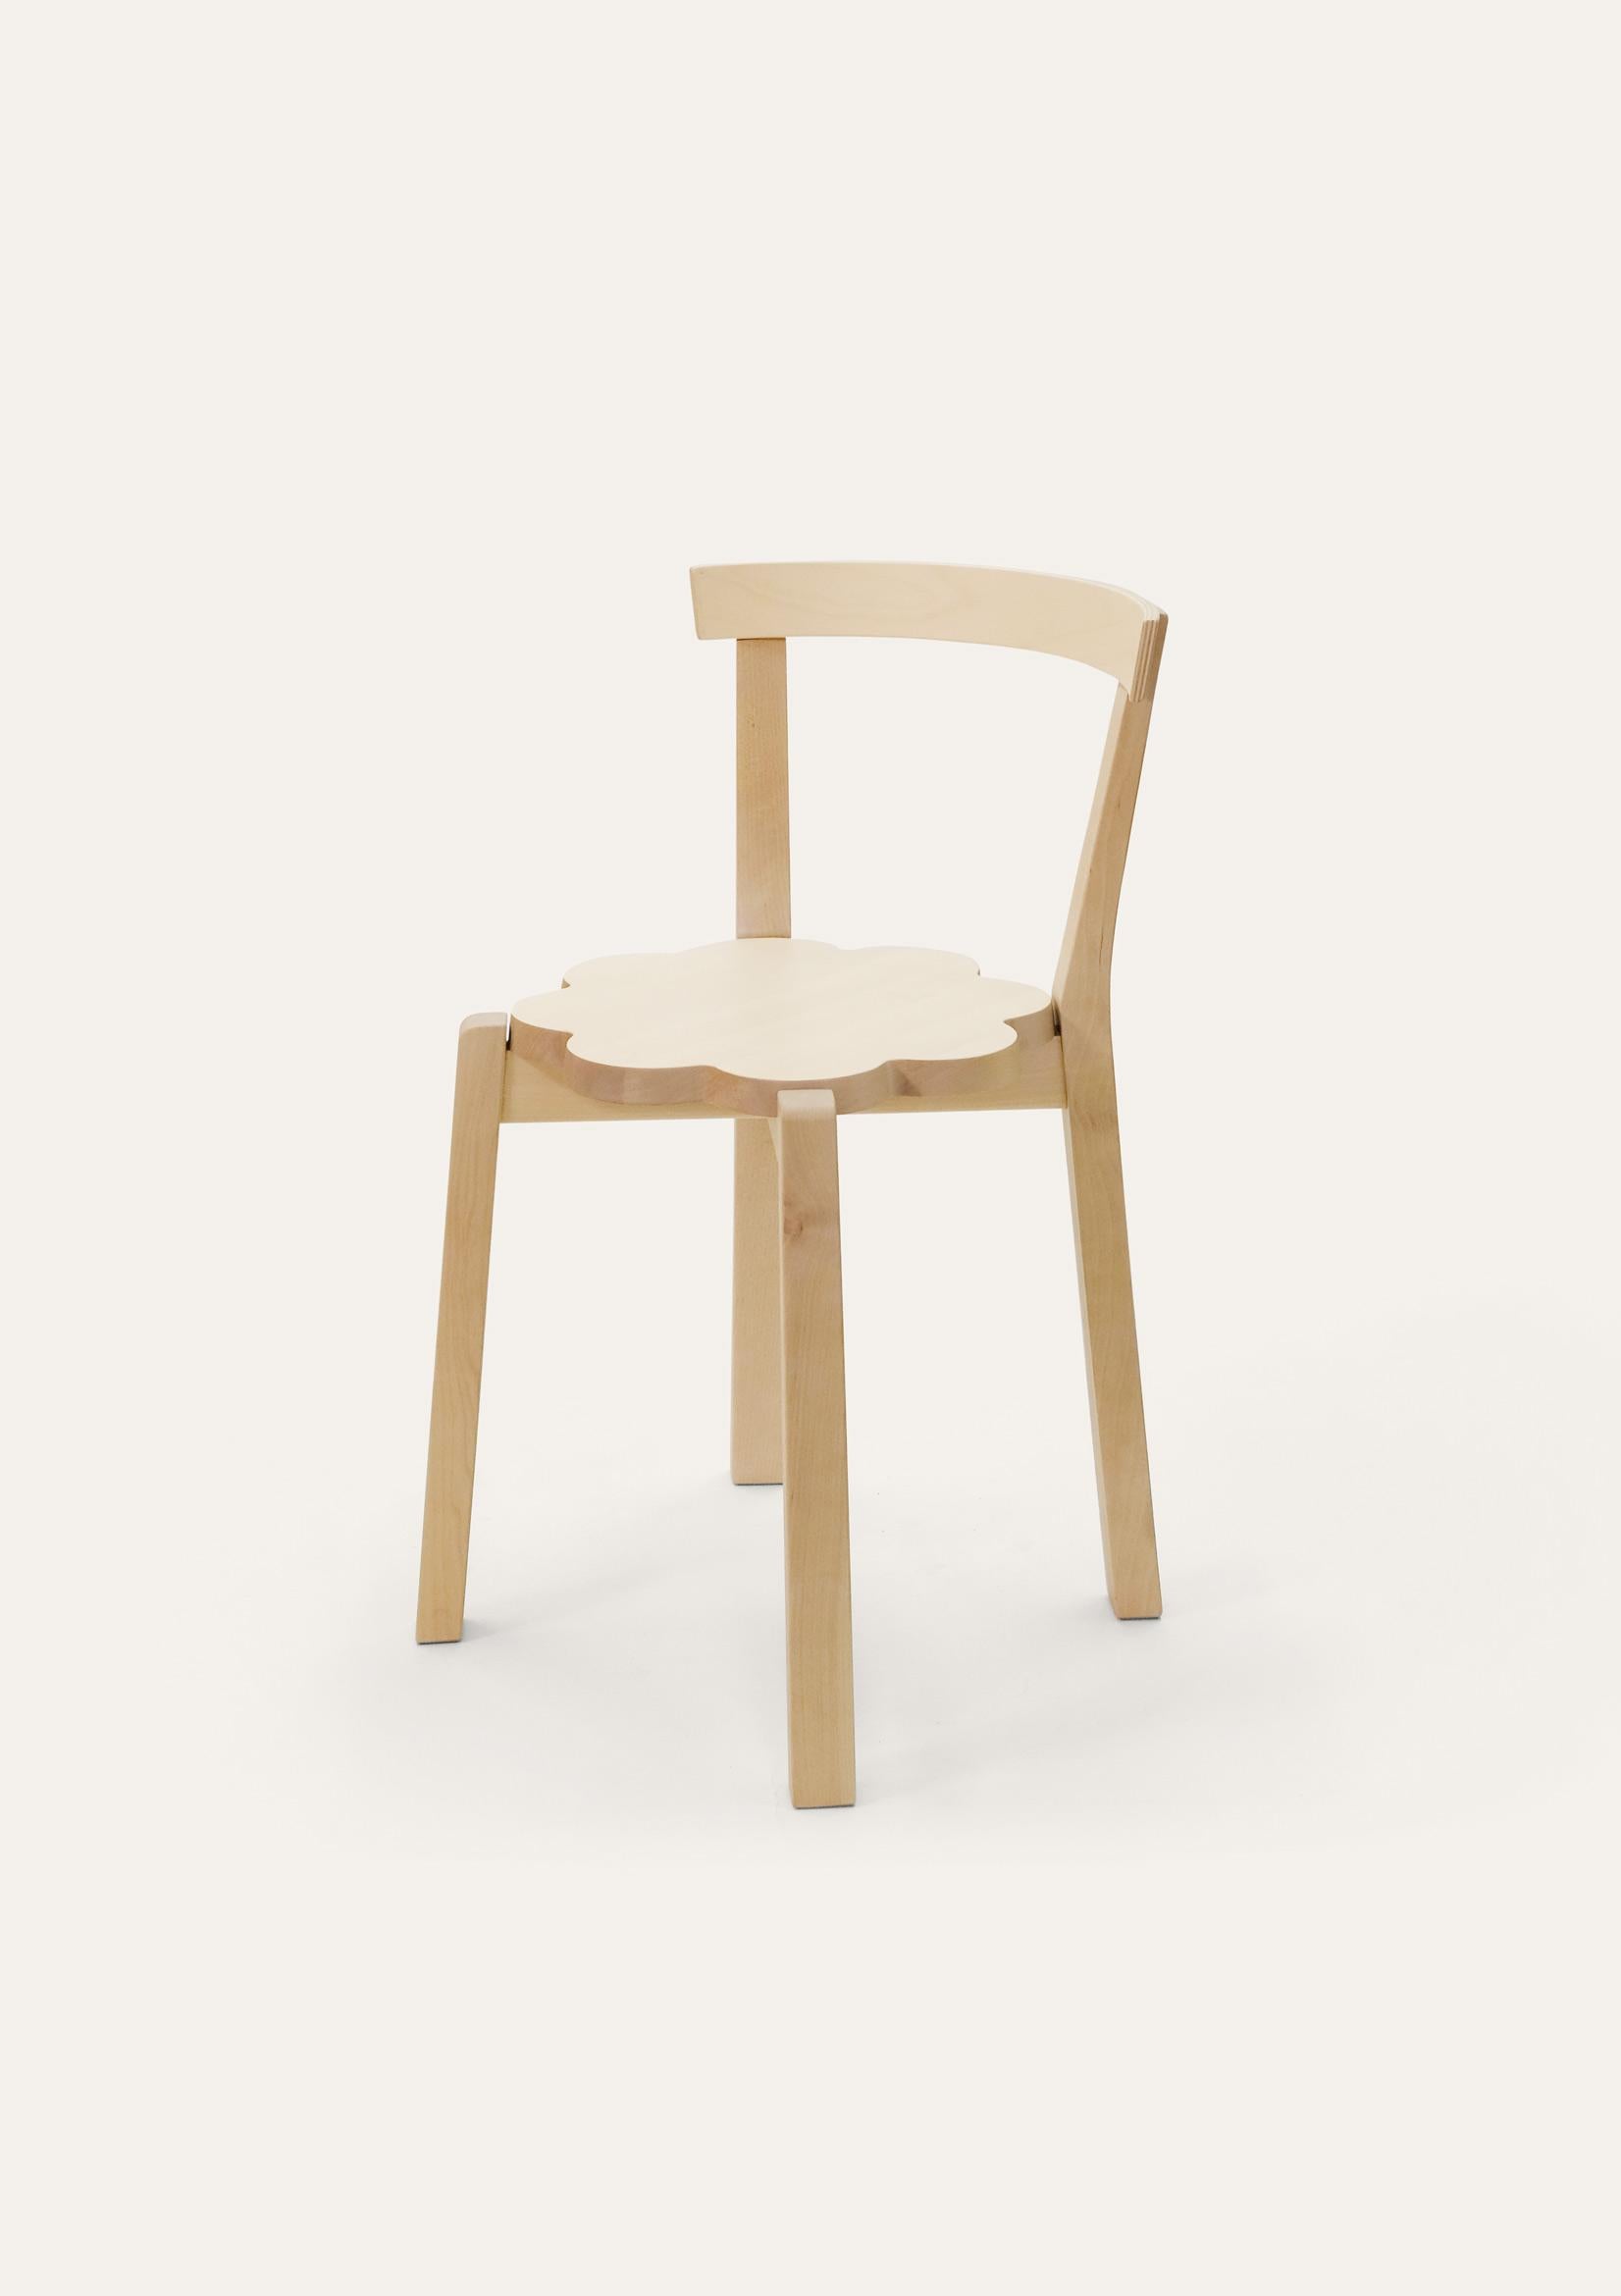 Natural Blossom chair by Storängen Design
Dimensions: D 46 x W 41 x H 72 x SH 45cm
Materials: birch wood.
Available in other colors and sizes.

A small and neat stackable chair, which works well round tables in cafes and living rooms.
A clean